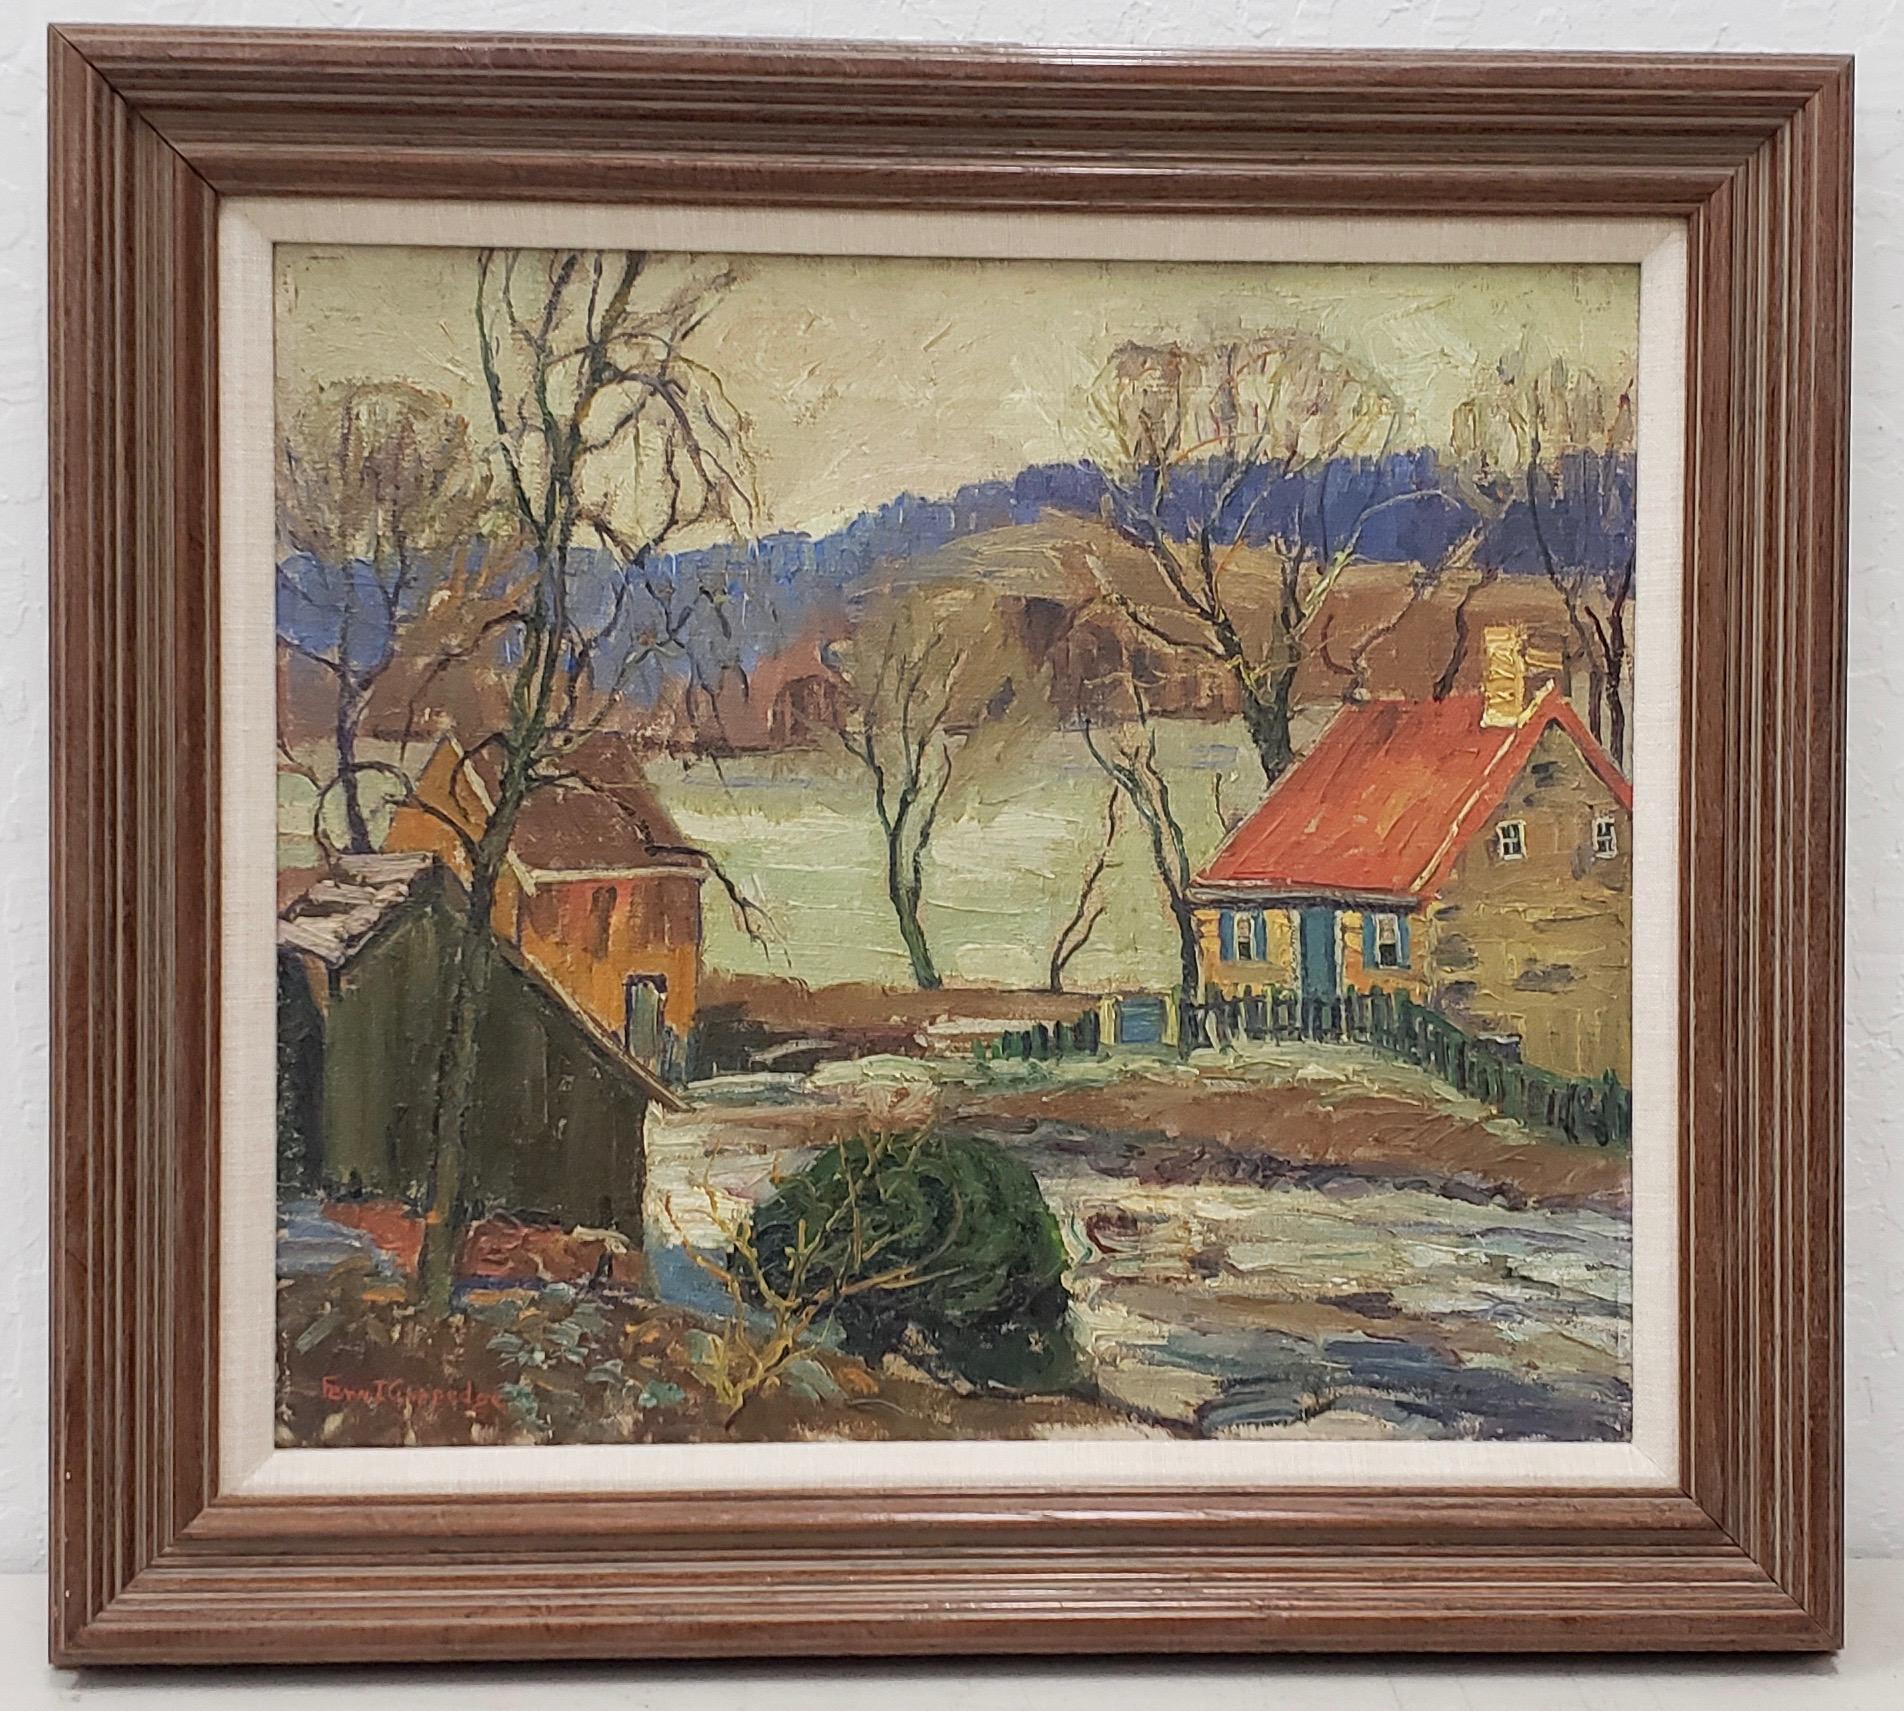 Fern Isabel Coppedge Landscape Painting - Fern Coppedge (American, 1883-1951)  "New Hope, Pennsylvania" Oil Painting  